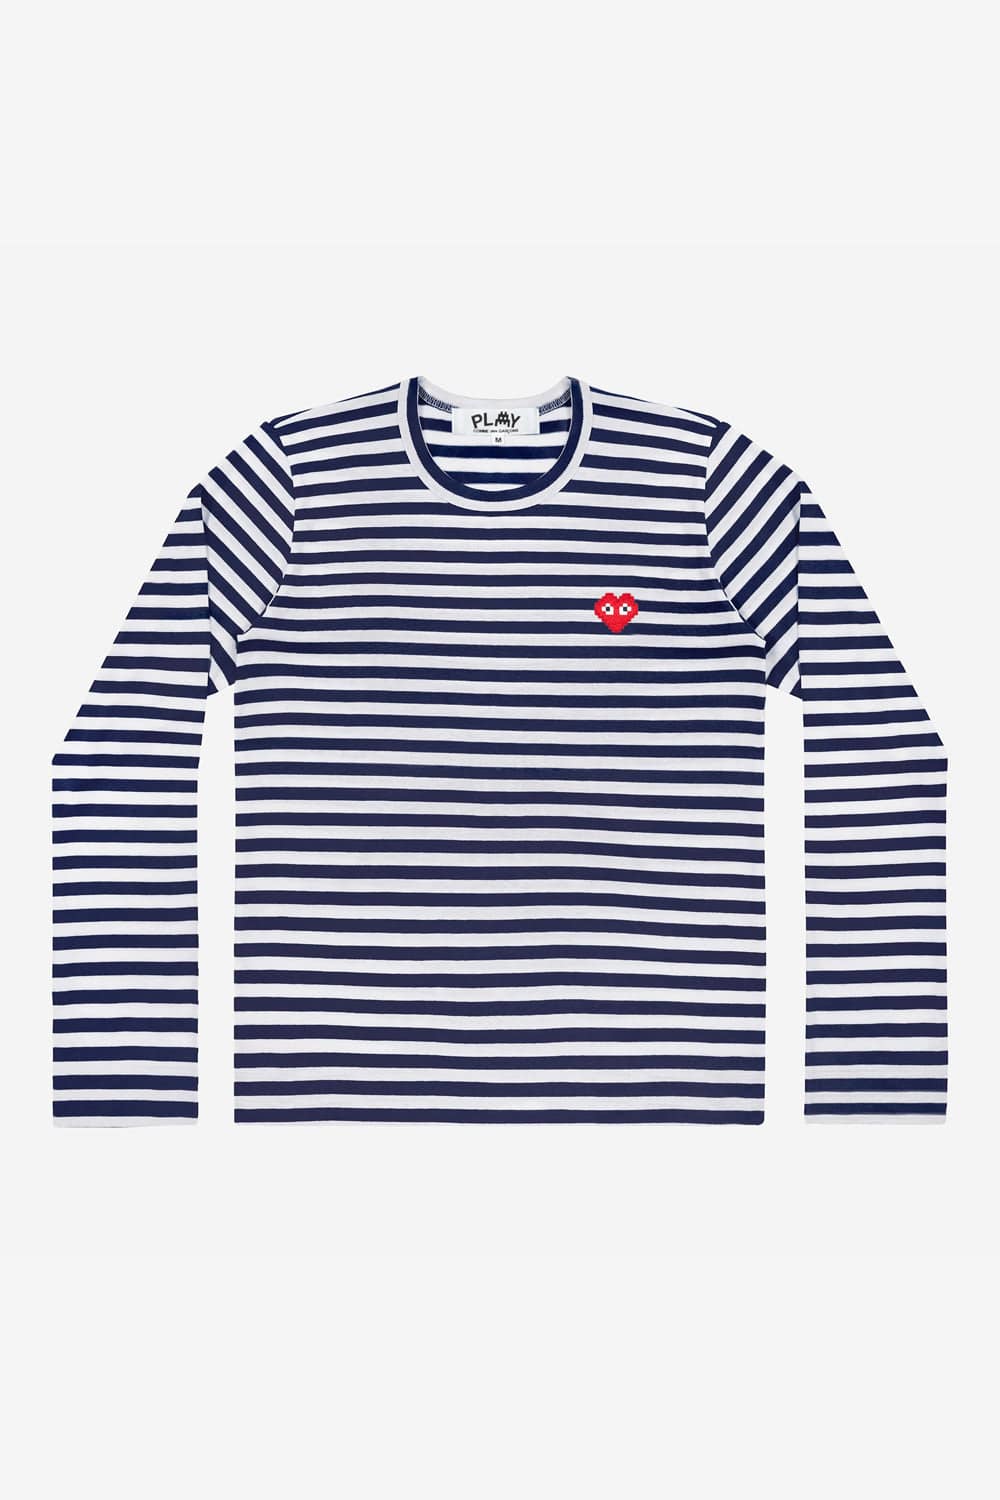 COMME des GARCONS PLAY T324 Invader Striped Longsleeve Tee (Navy/White)